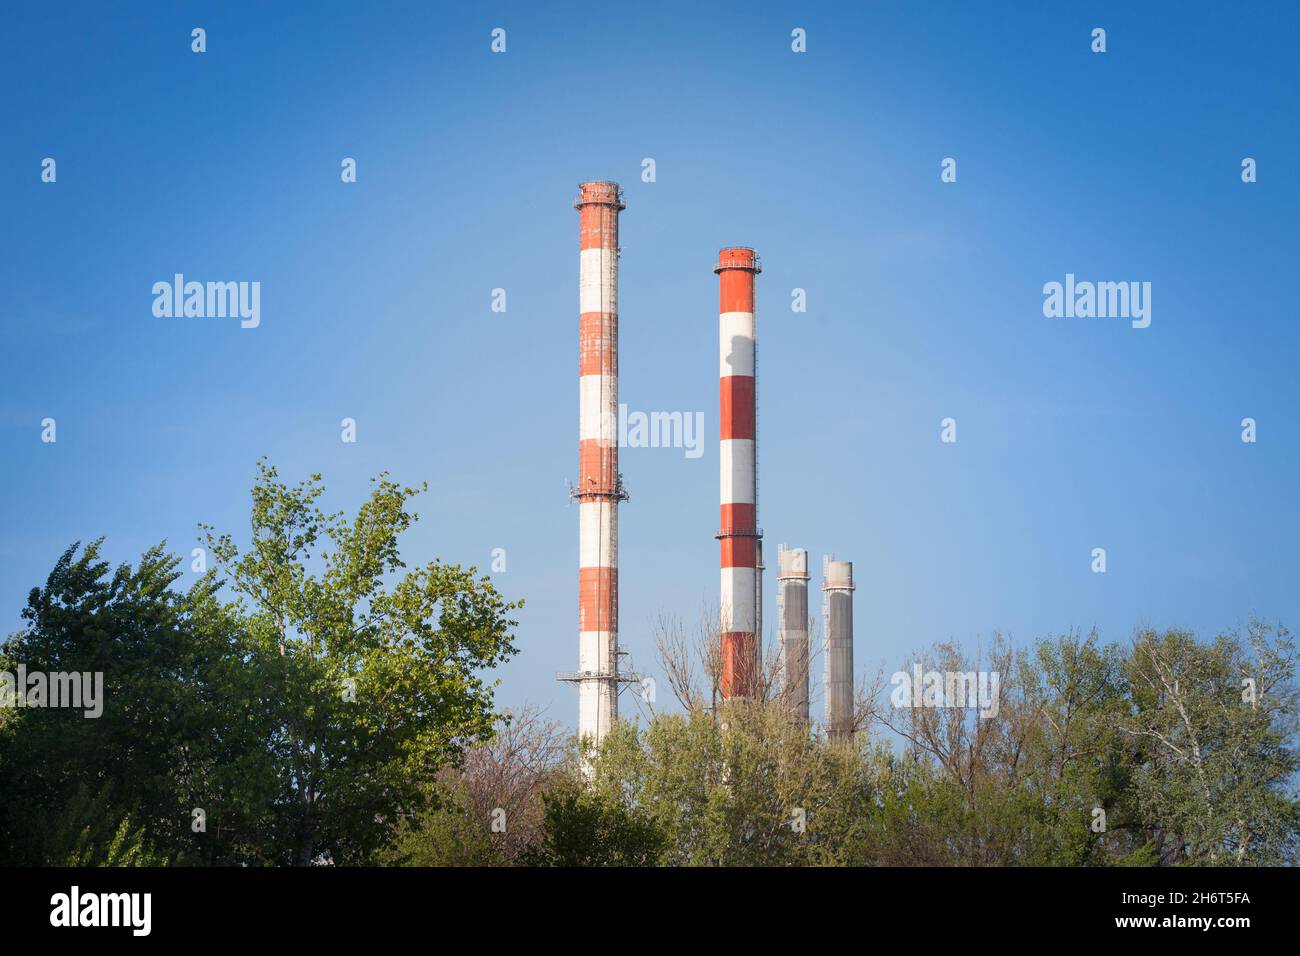 Picture of the panorama of an industrial landscape, taken in belgrade, Serbia. Typical devices like chimneys, plants, factories are visible Stock Photo